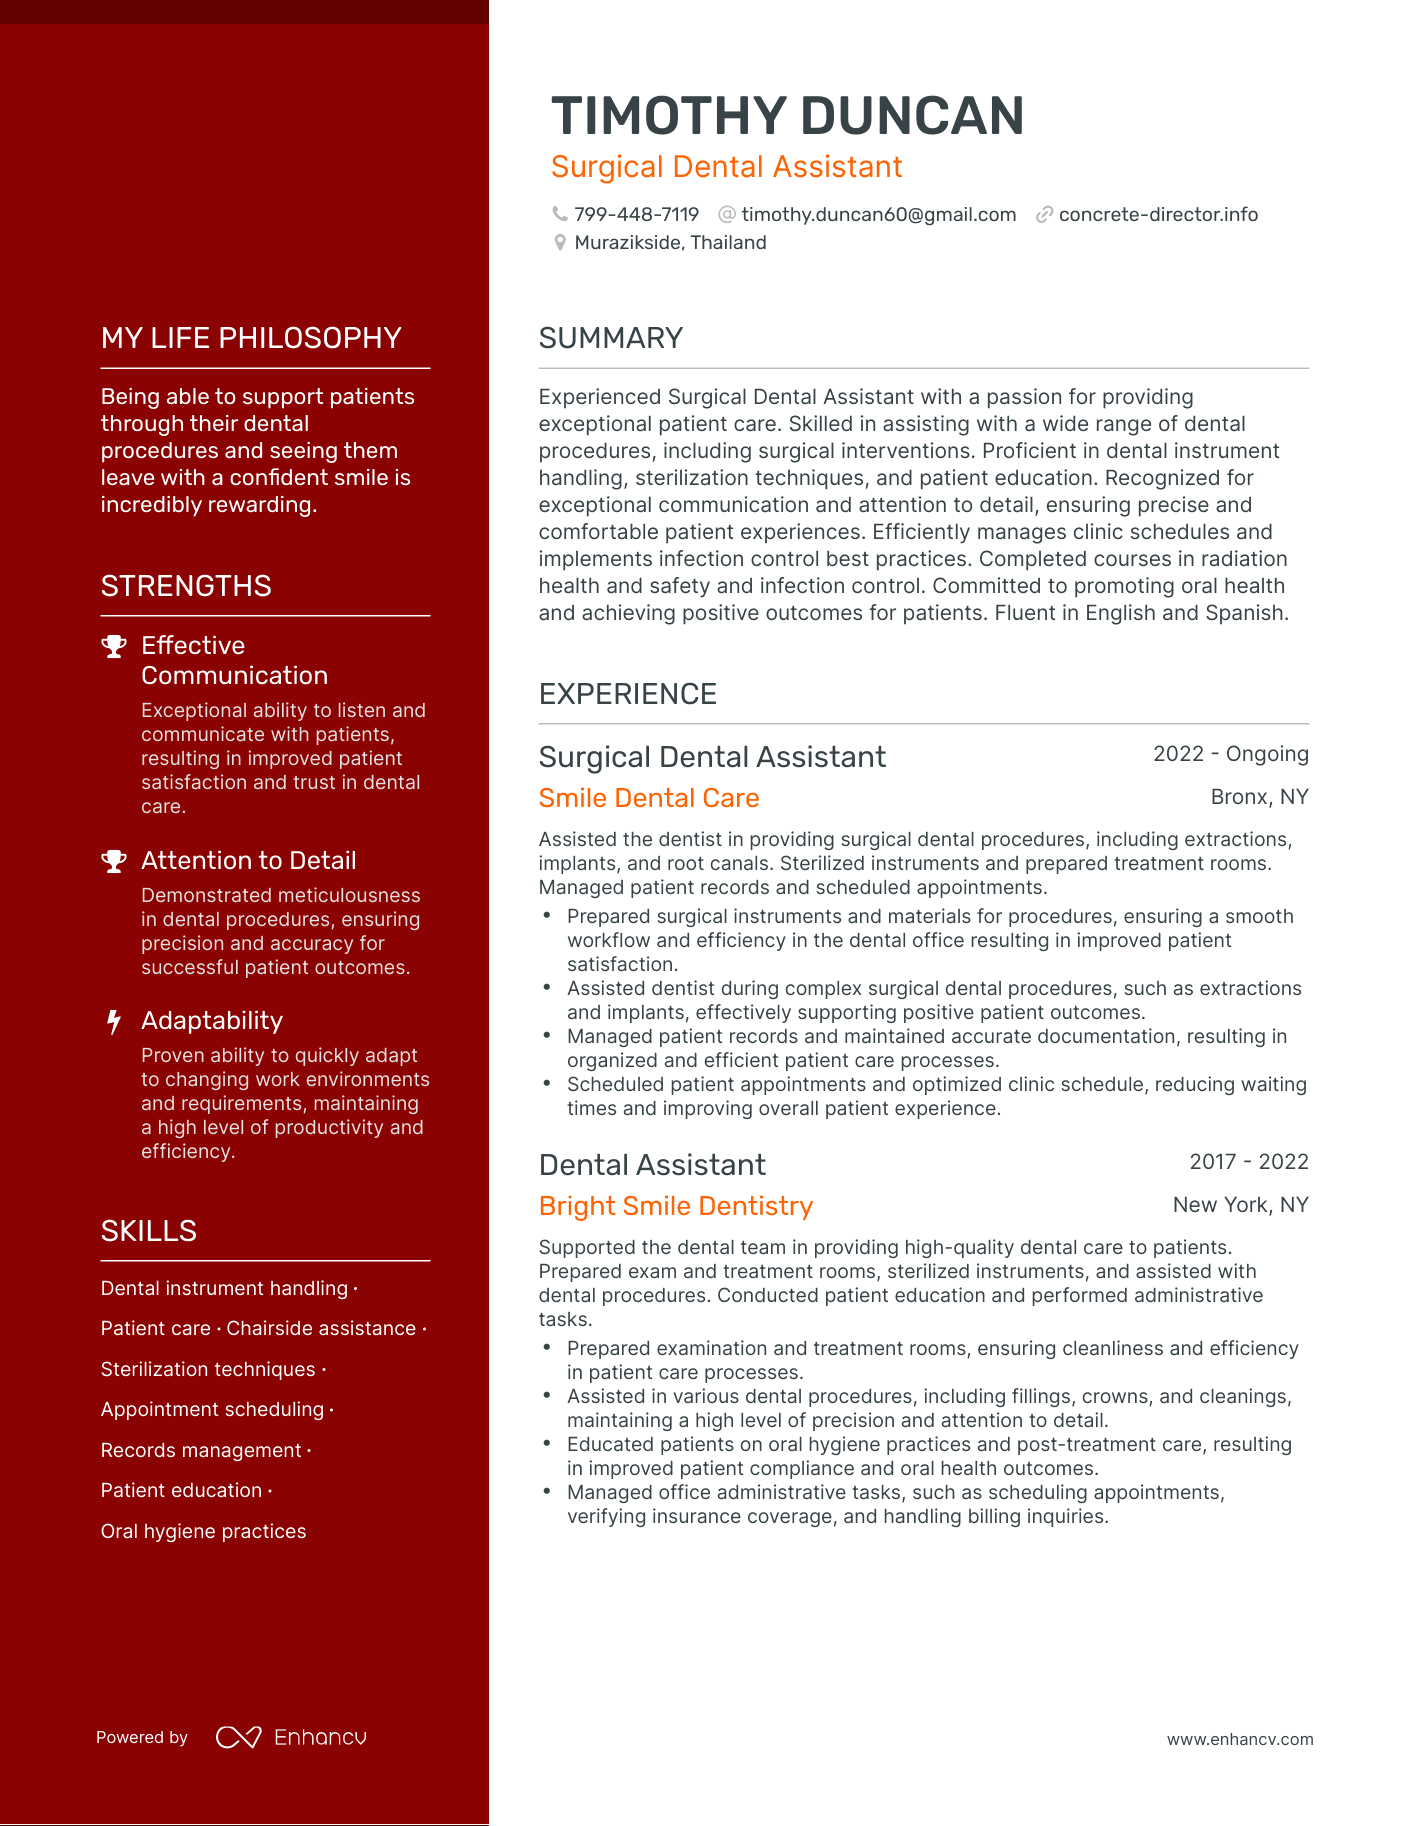 Surgical Dental Assistant resume example